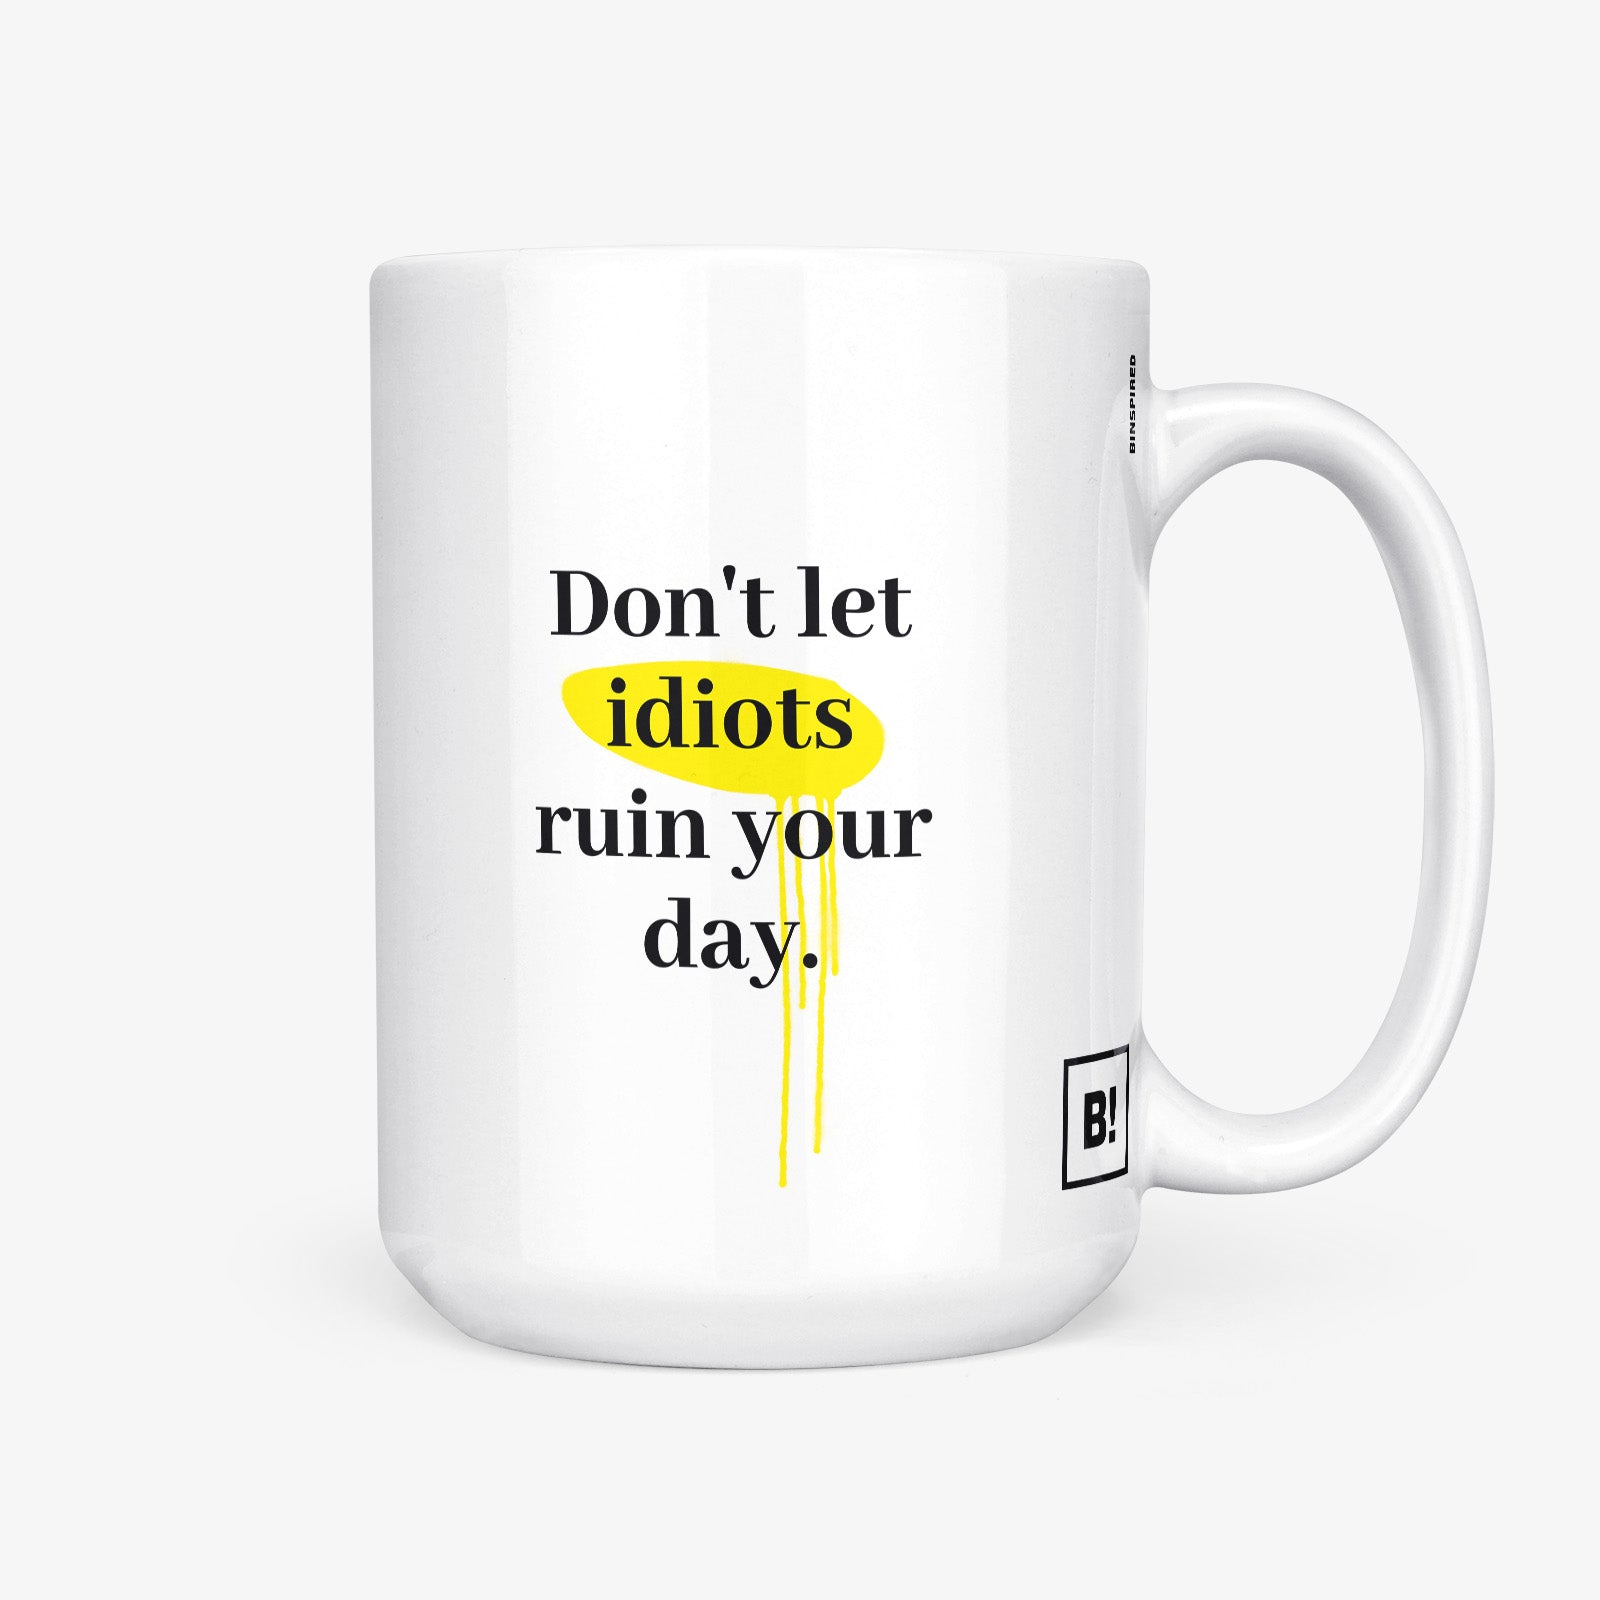 Get inspired by the quote, "Don't let idiots ruin your day" on this 15oz white glossy coffee mug with the handle on the right.